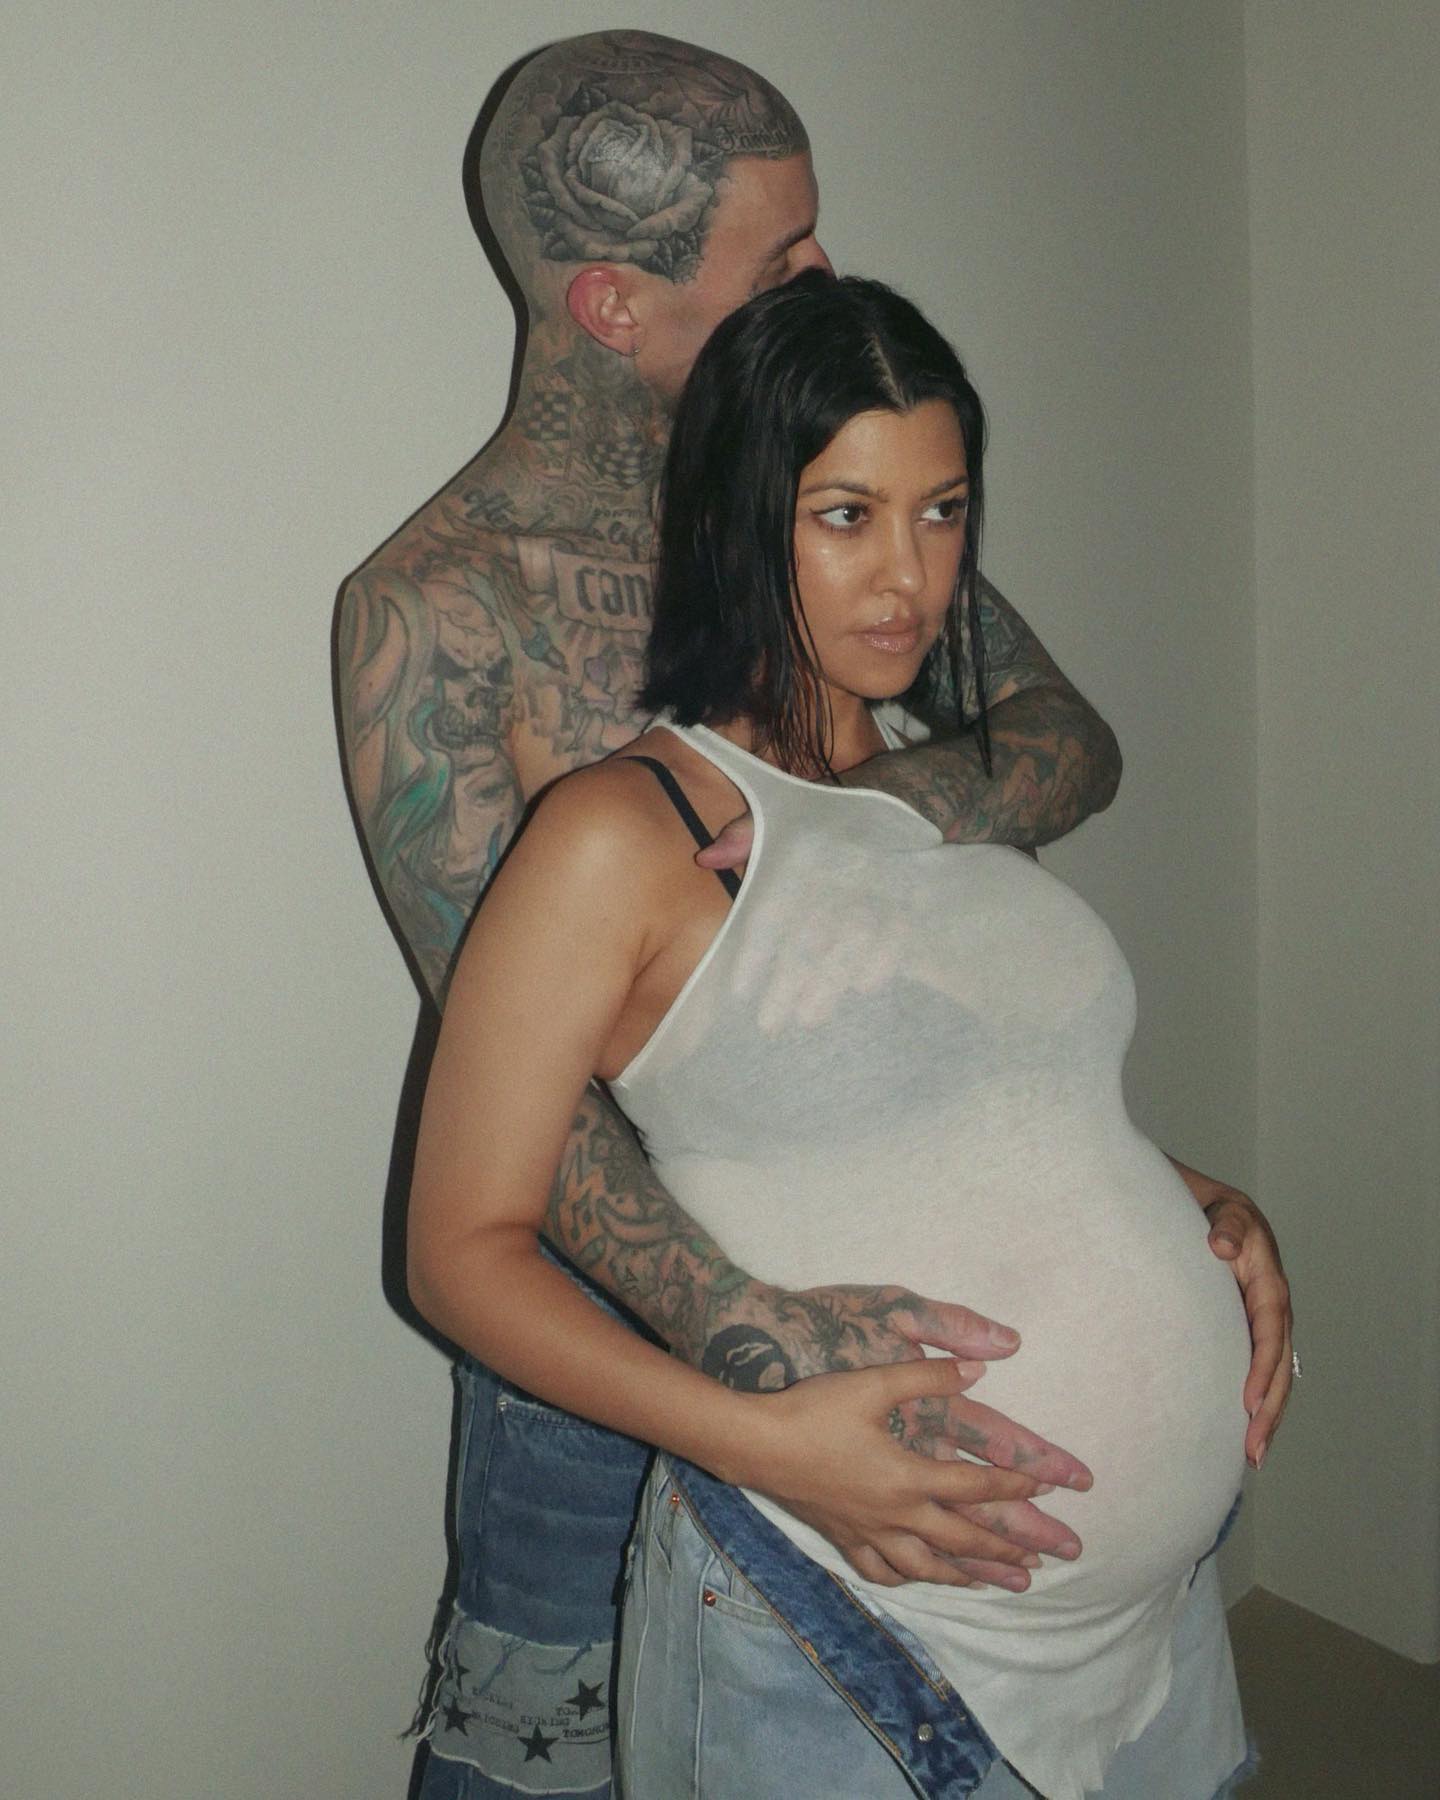 Since giving birth, Kourtney and Travis have kept their baby's face private